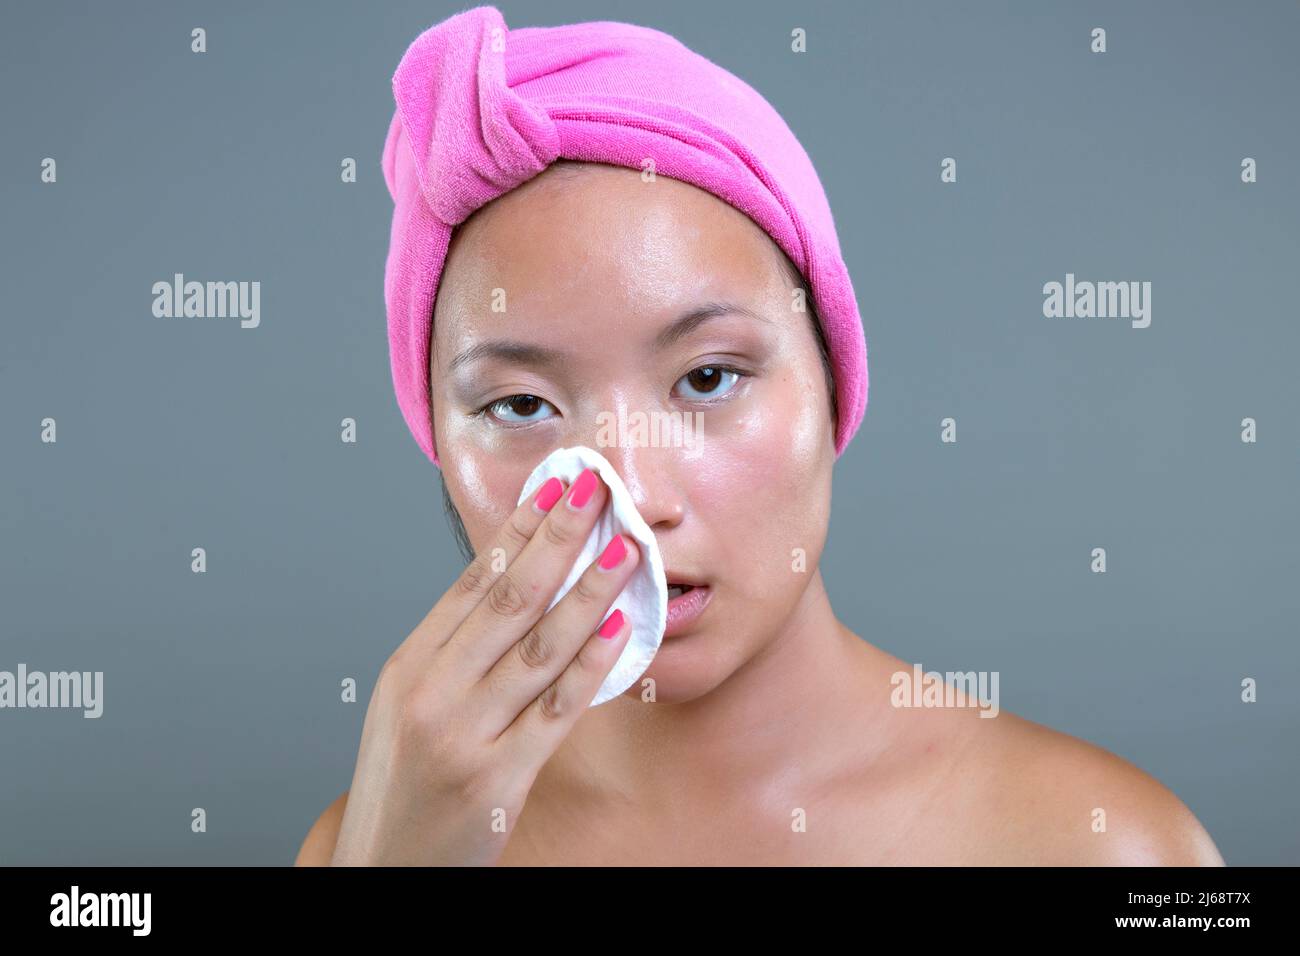 young asian ethnicity woman cleaning her face Stock Photo